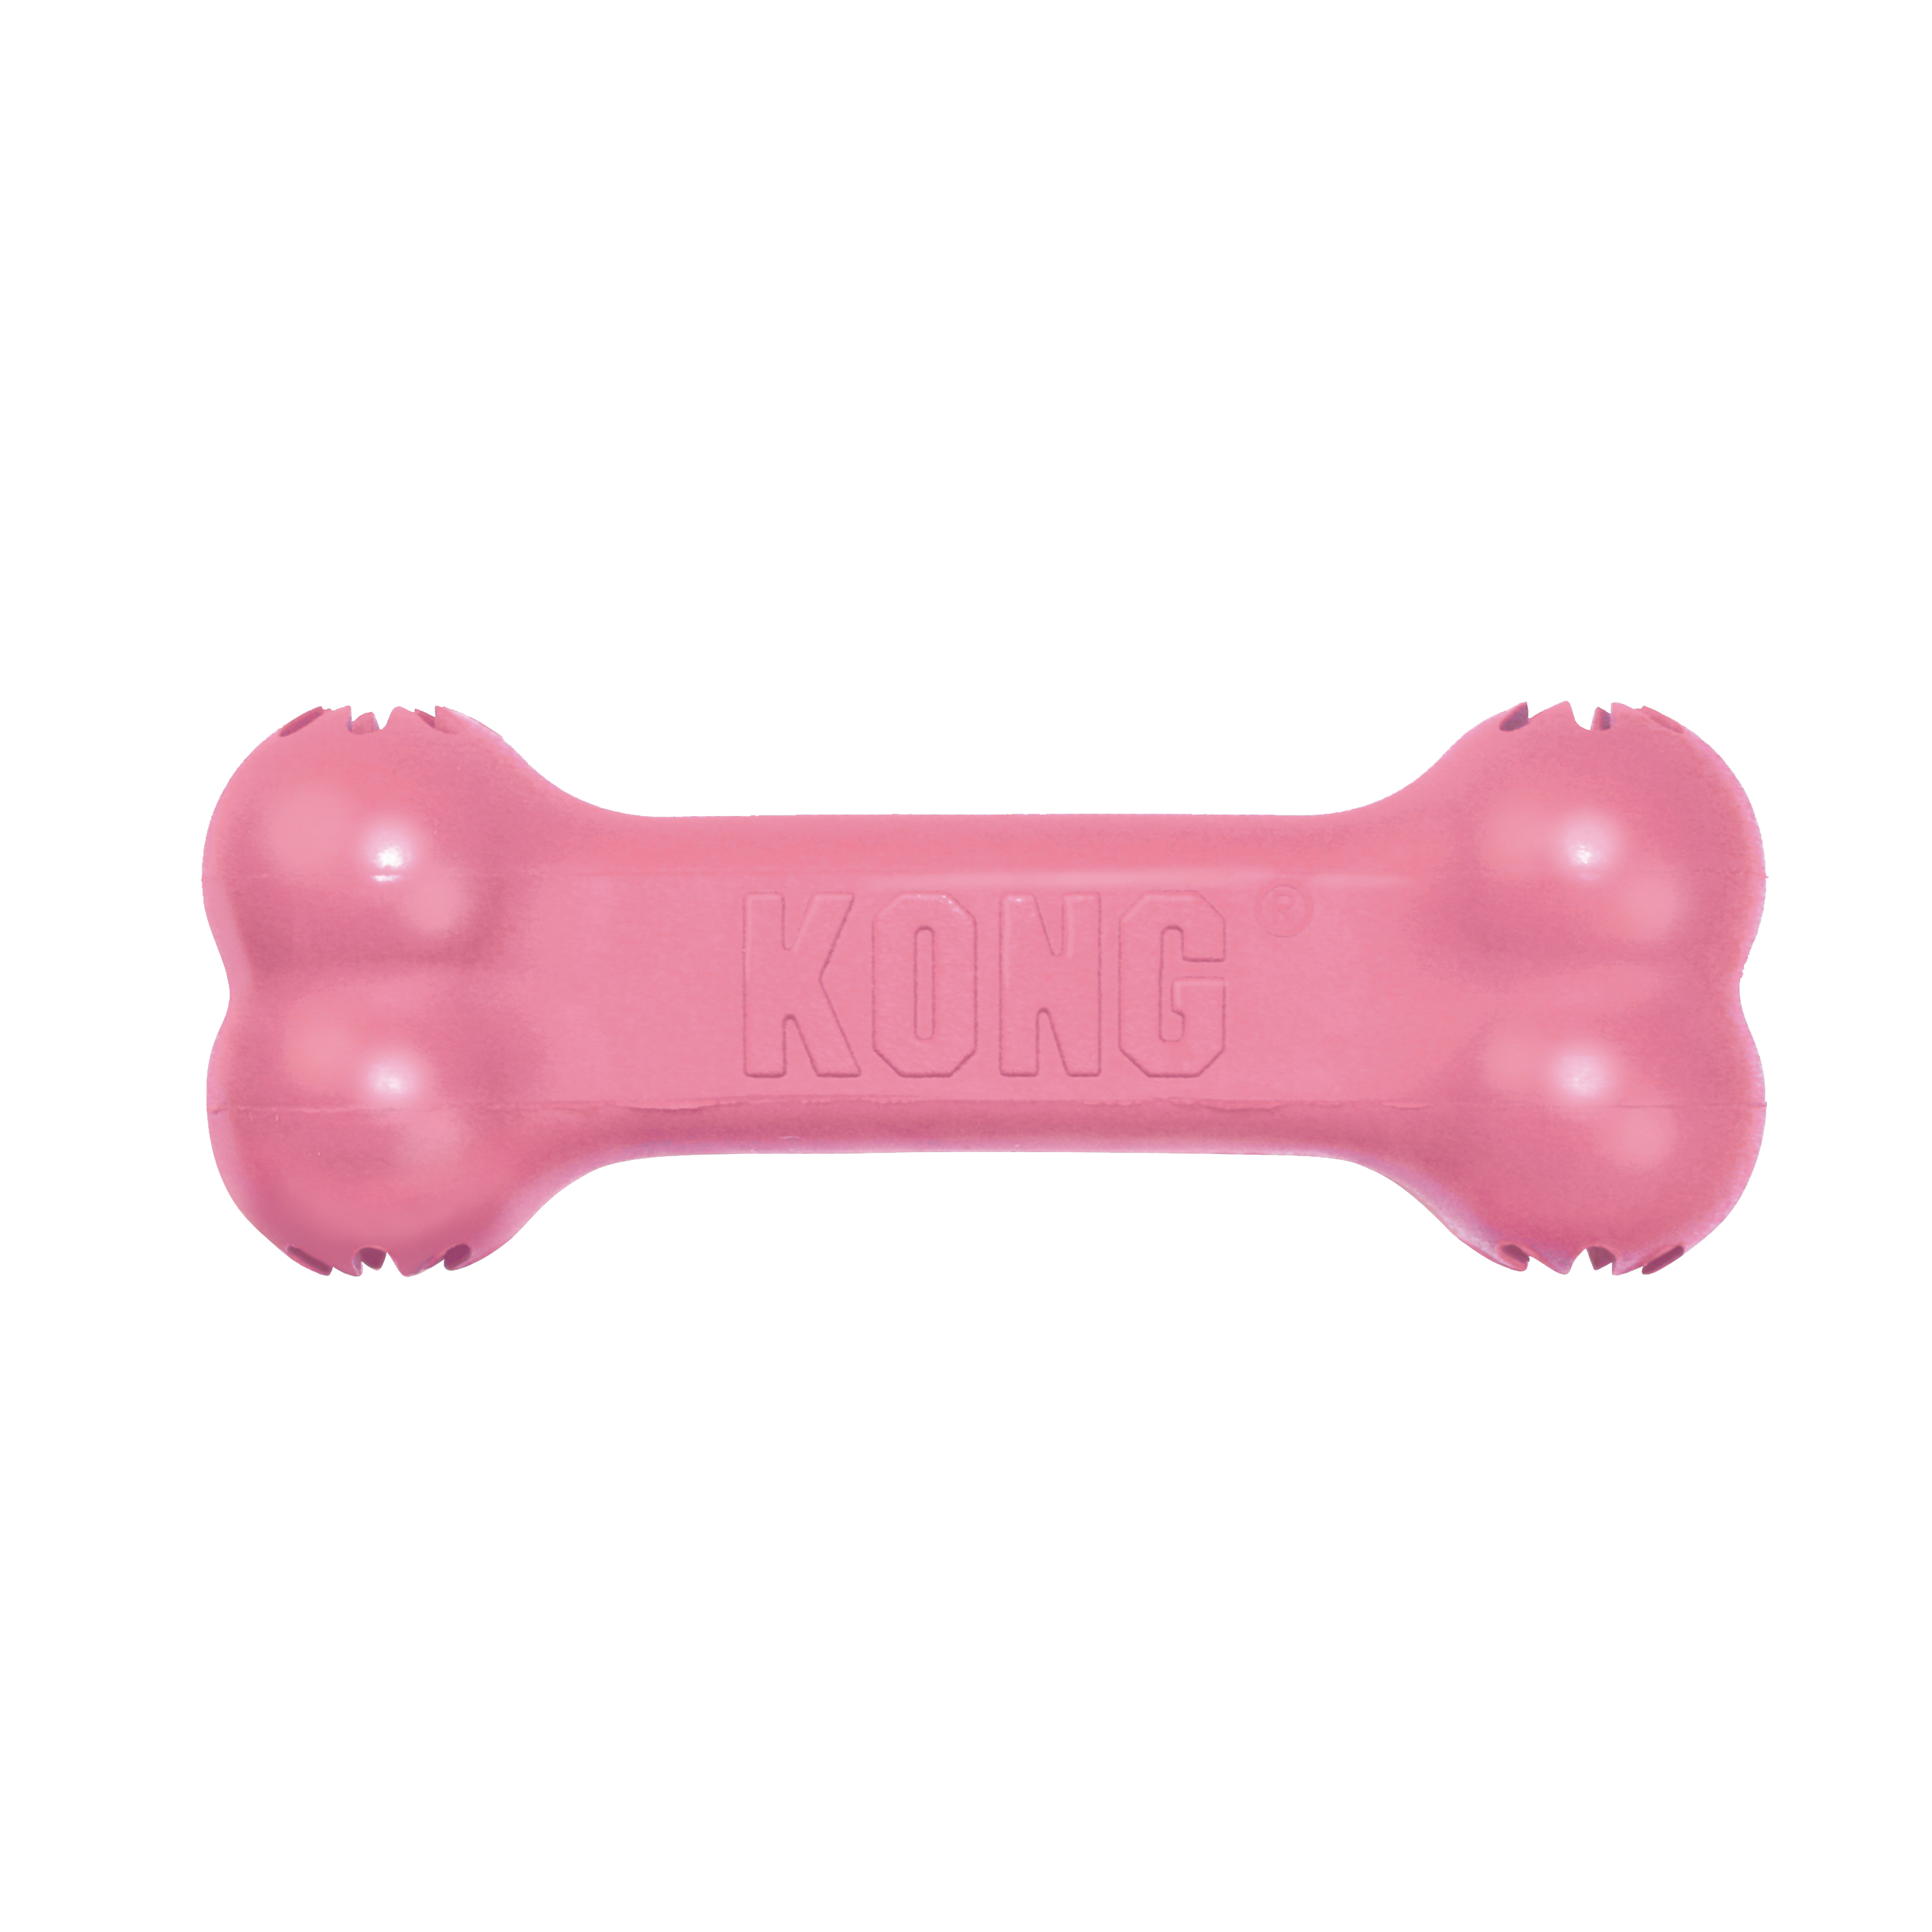 KONG Puppy Goodie Bone offpack product image